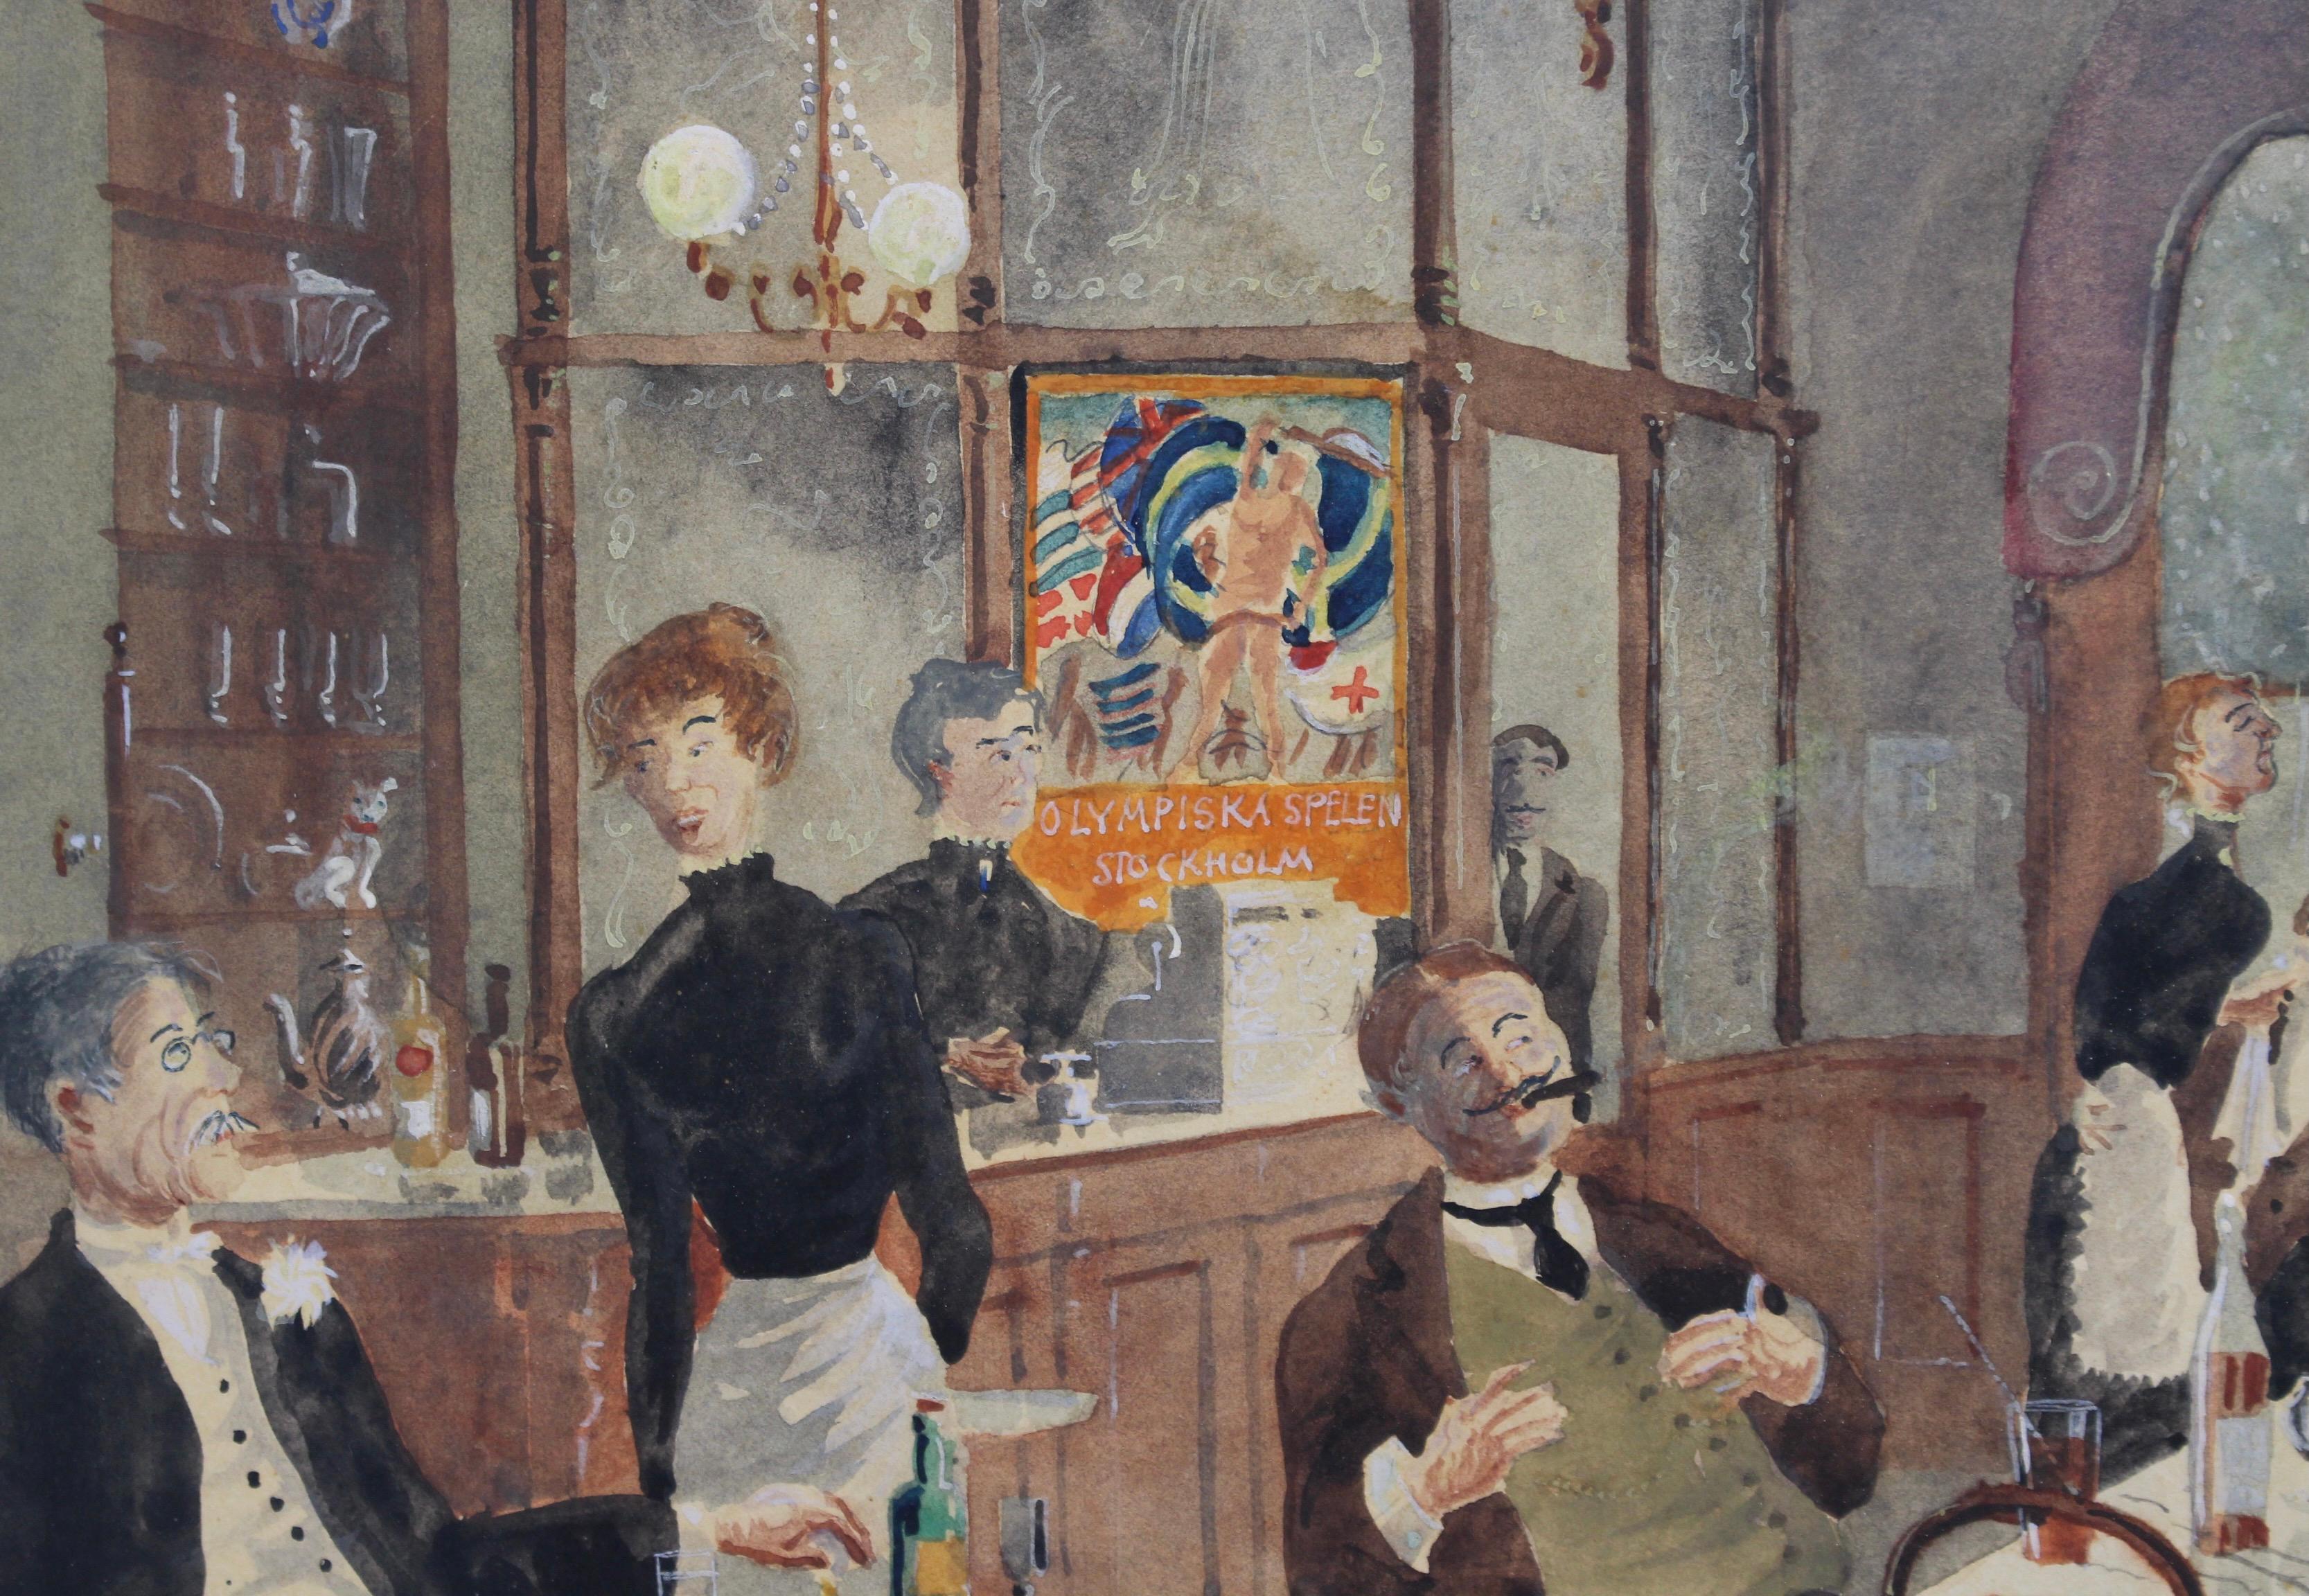 'Stockholm Restaurant and Café', gouache on art paper, by Rudolf Carlborg (1951). Although dated 1951, the scene depicted is closer to the turn of the 20th century. The clothing worn by the customers and staff, along with the poster for the 1912